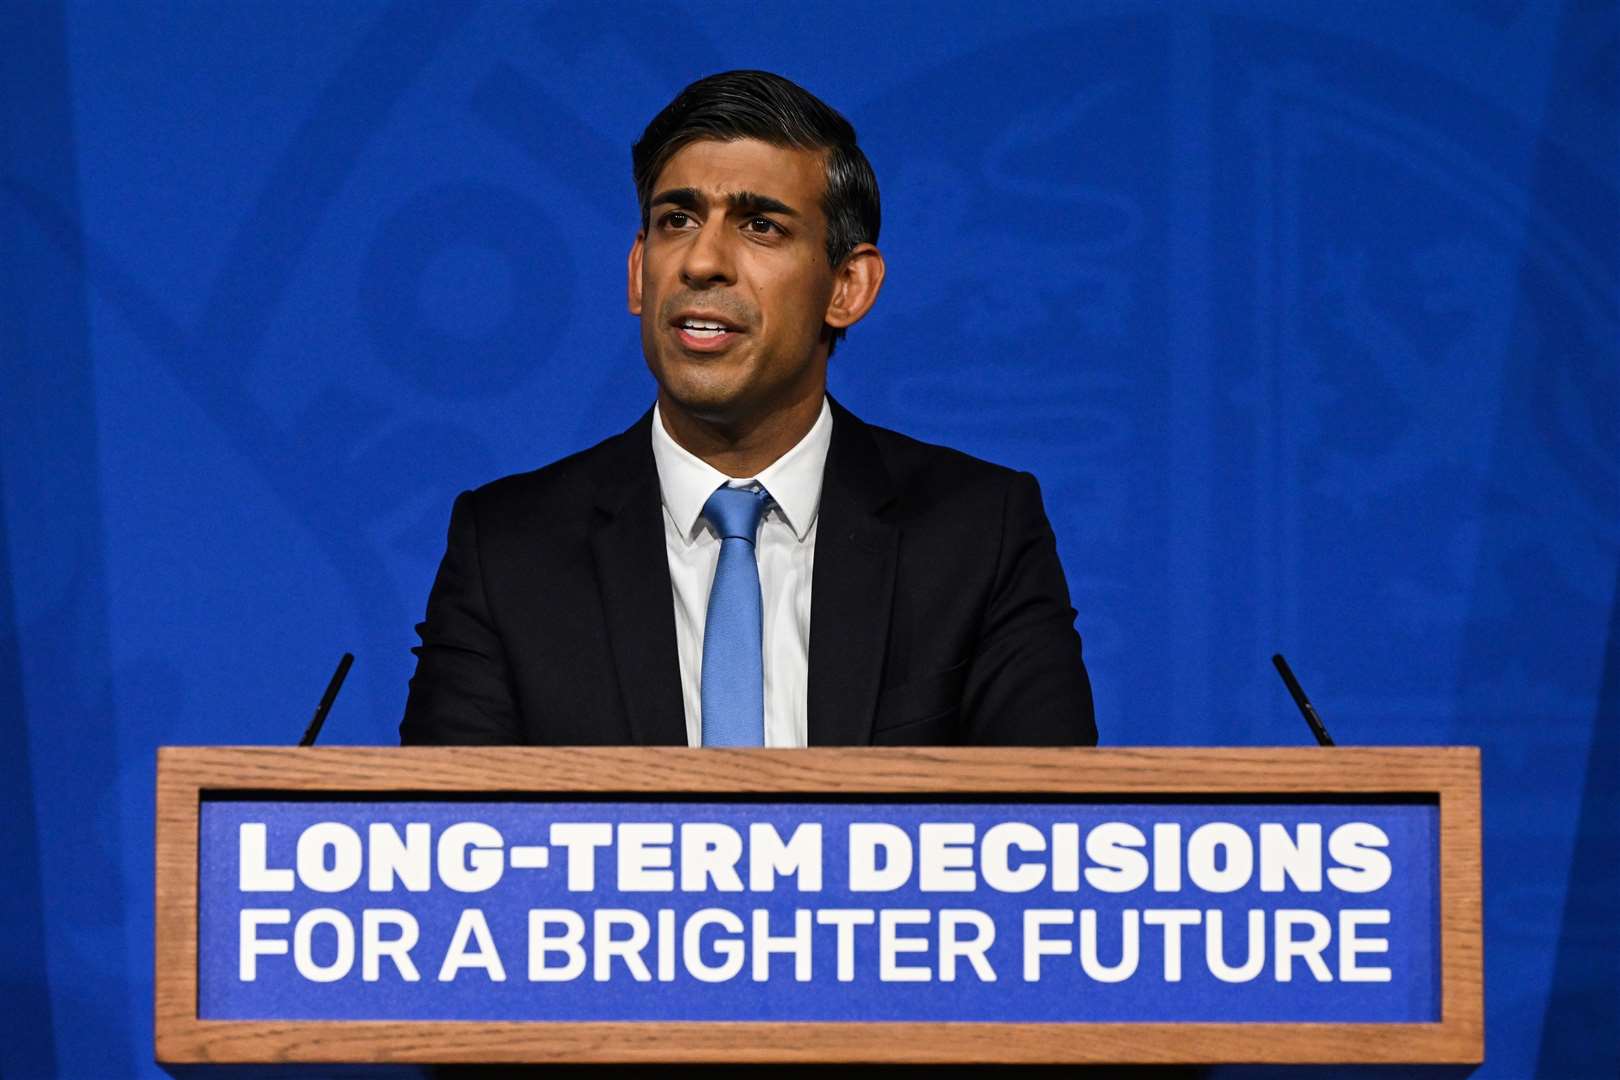 Prime Minister Rishi Sunak faces fierce criticism from green-minded Tories, environmentalists and industry figures after watering down climate policies (Justin Tallis/PA)